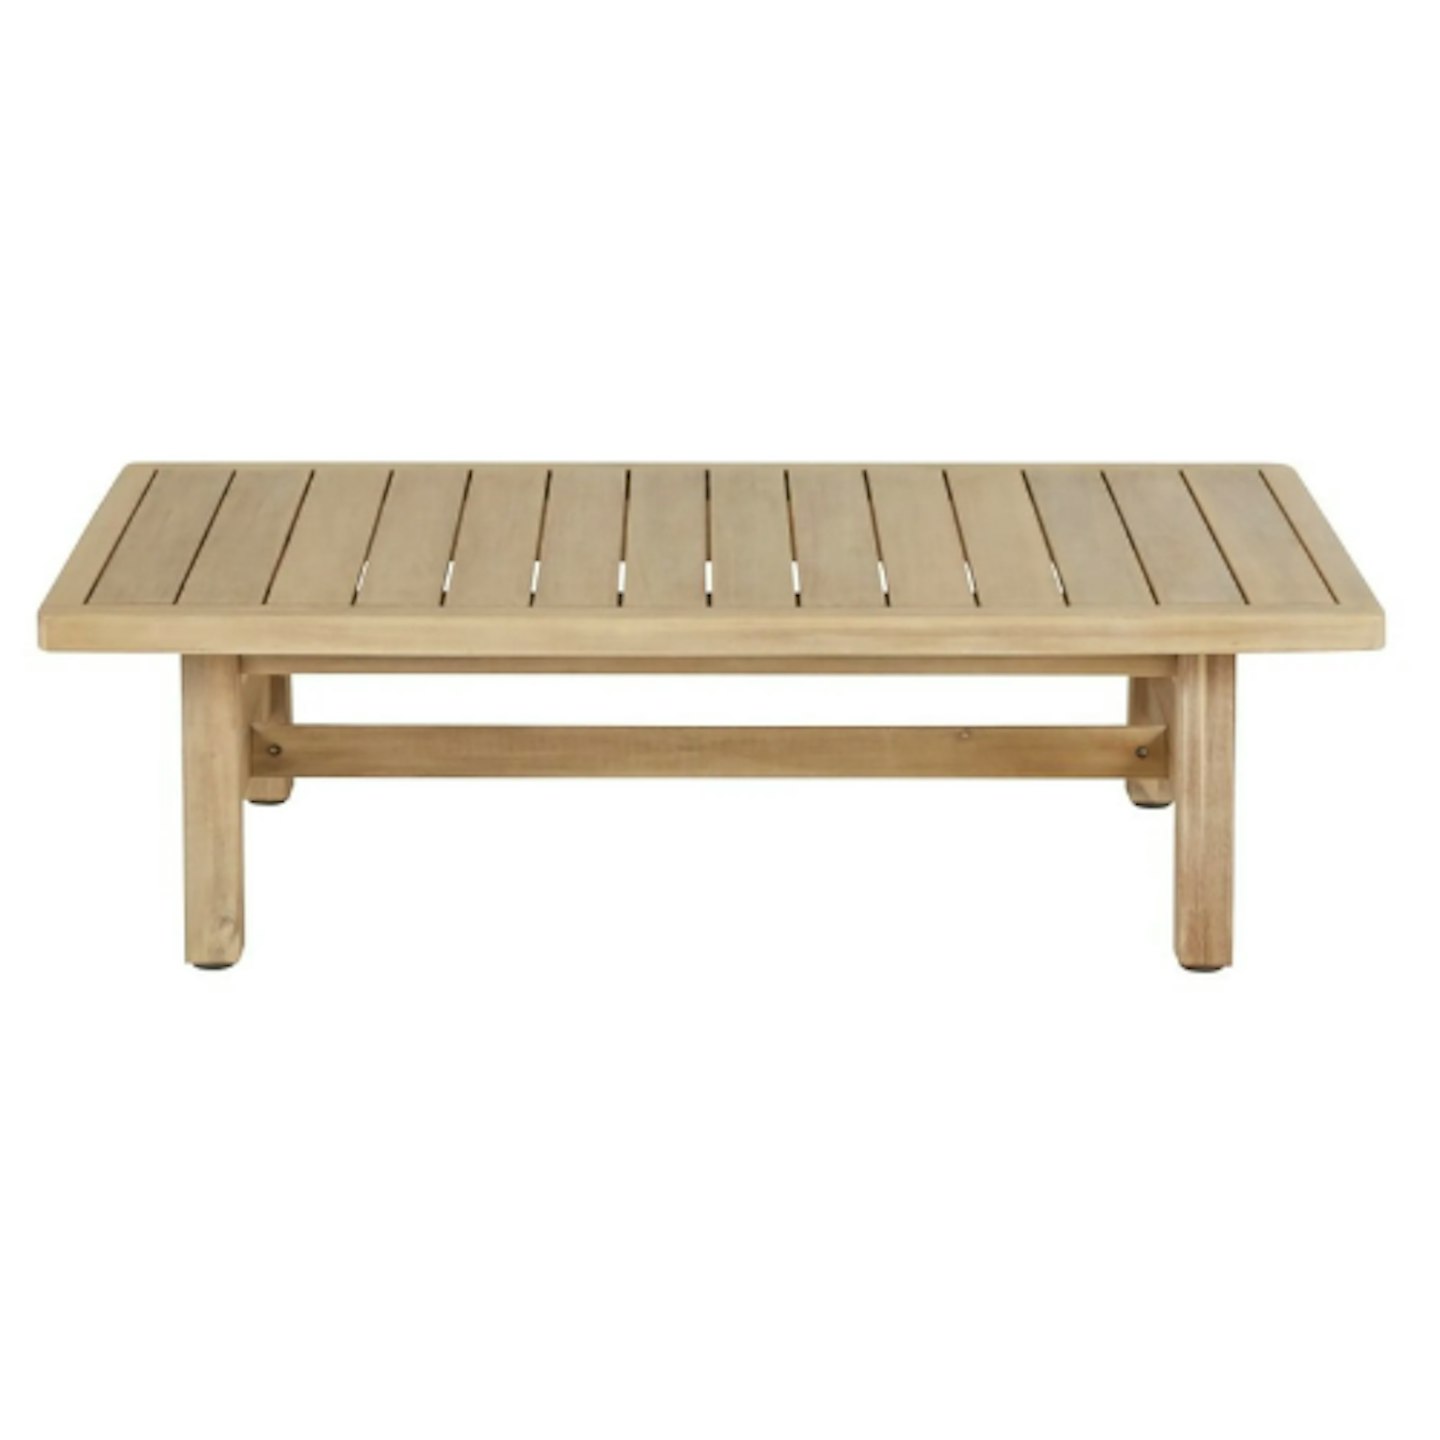 Barcares Business Professional Garden Coffee Table